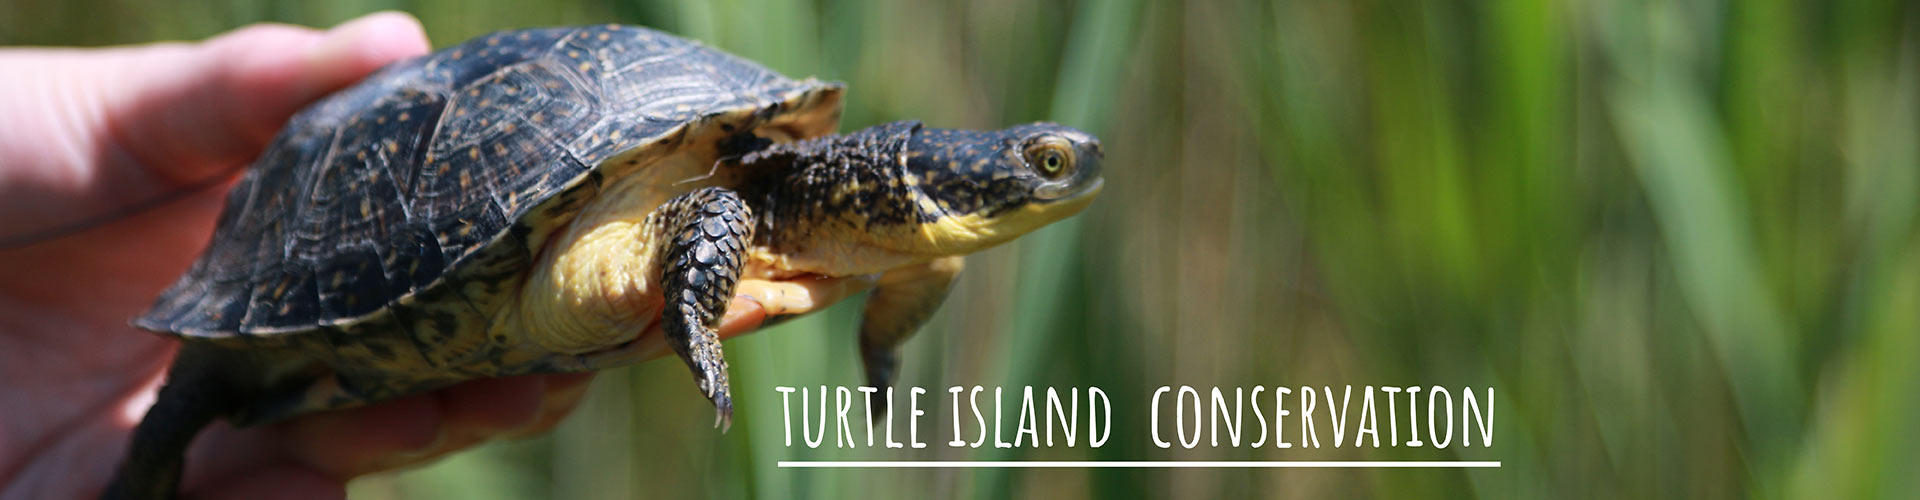 Turtle Island Conservation - Resources